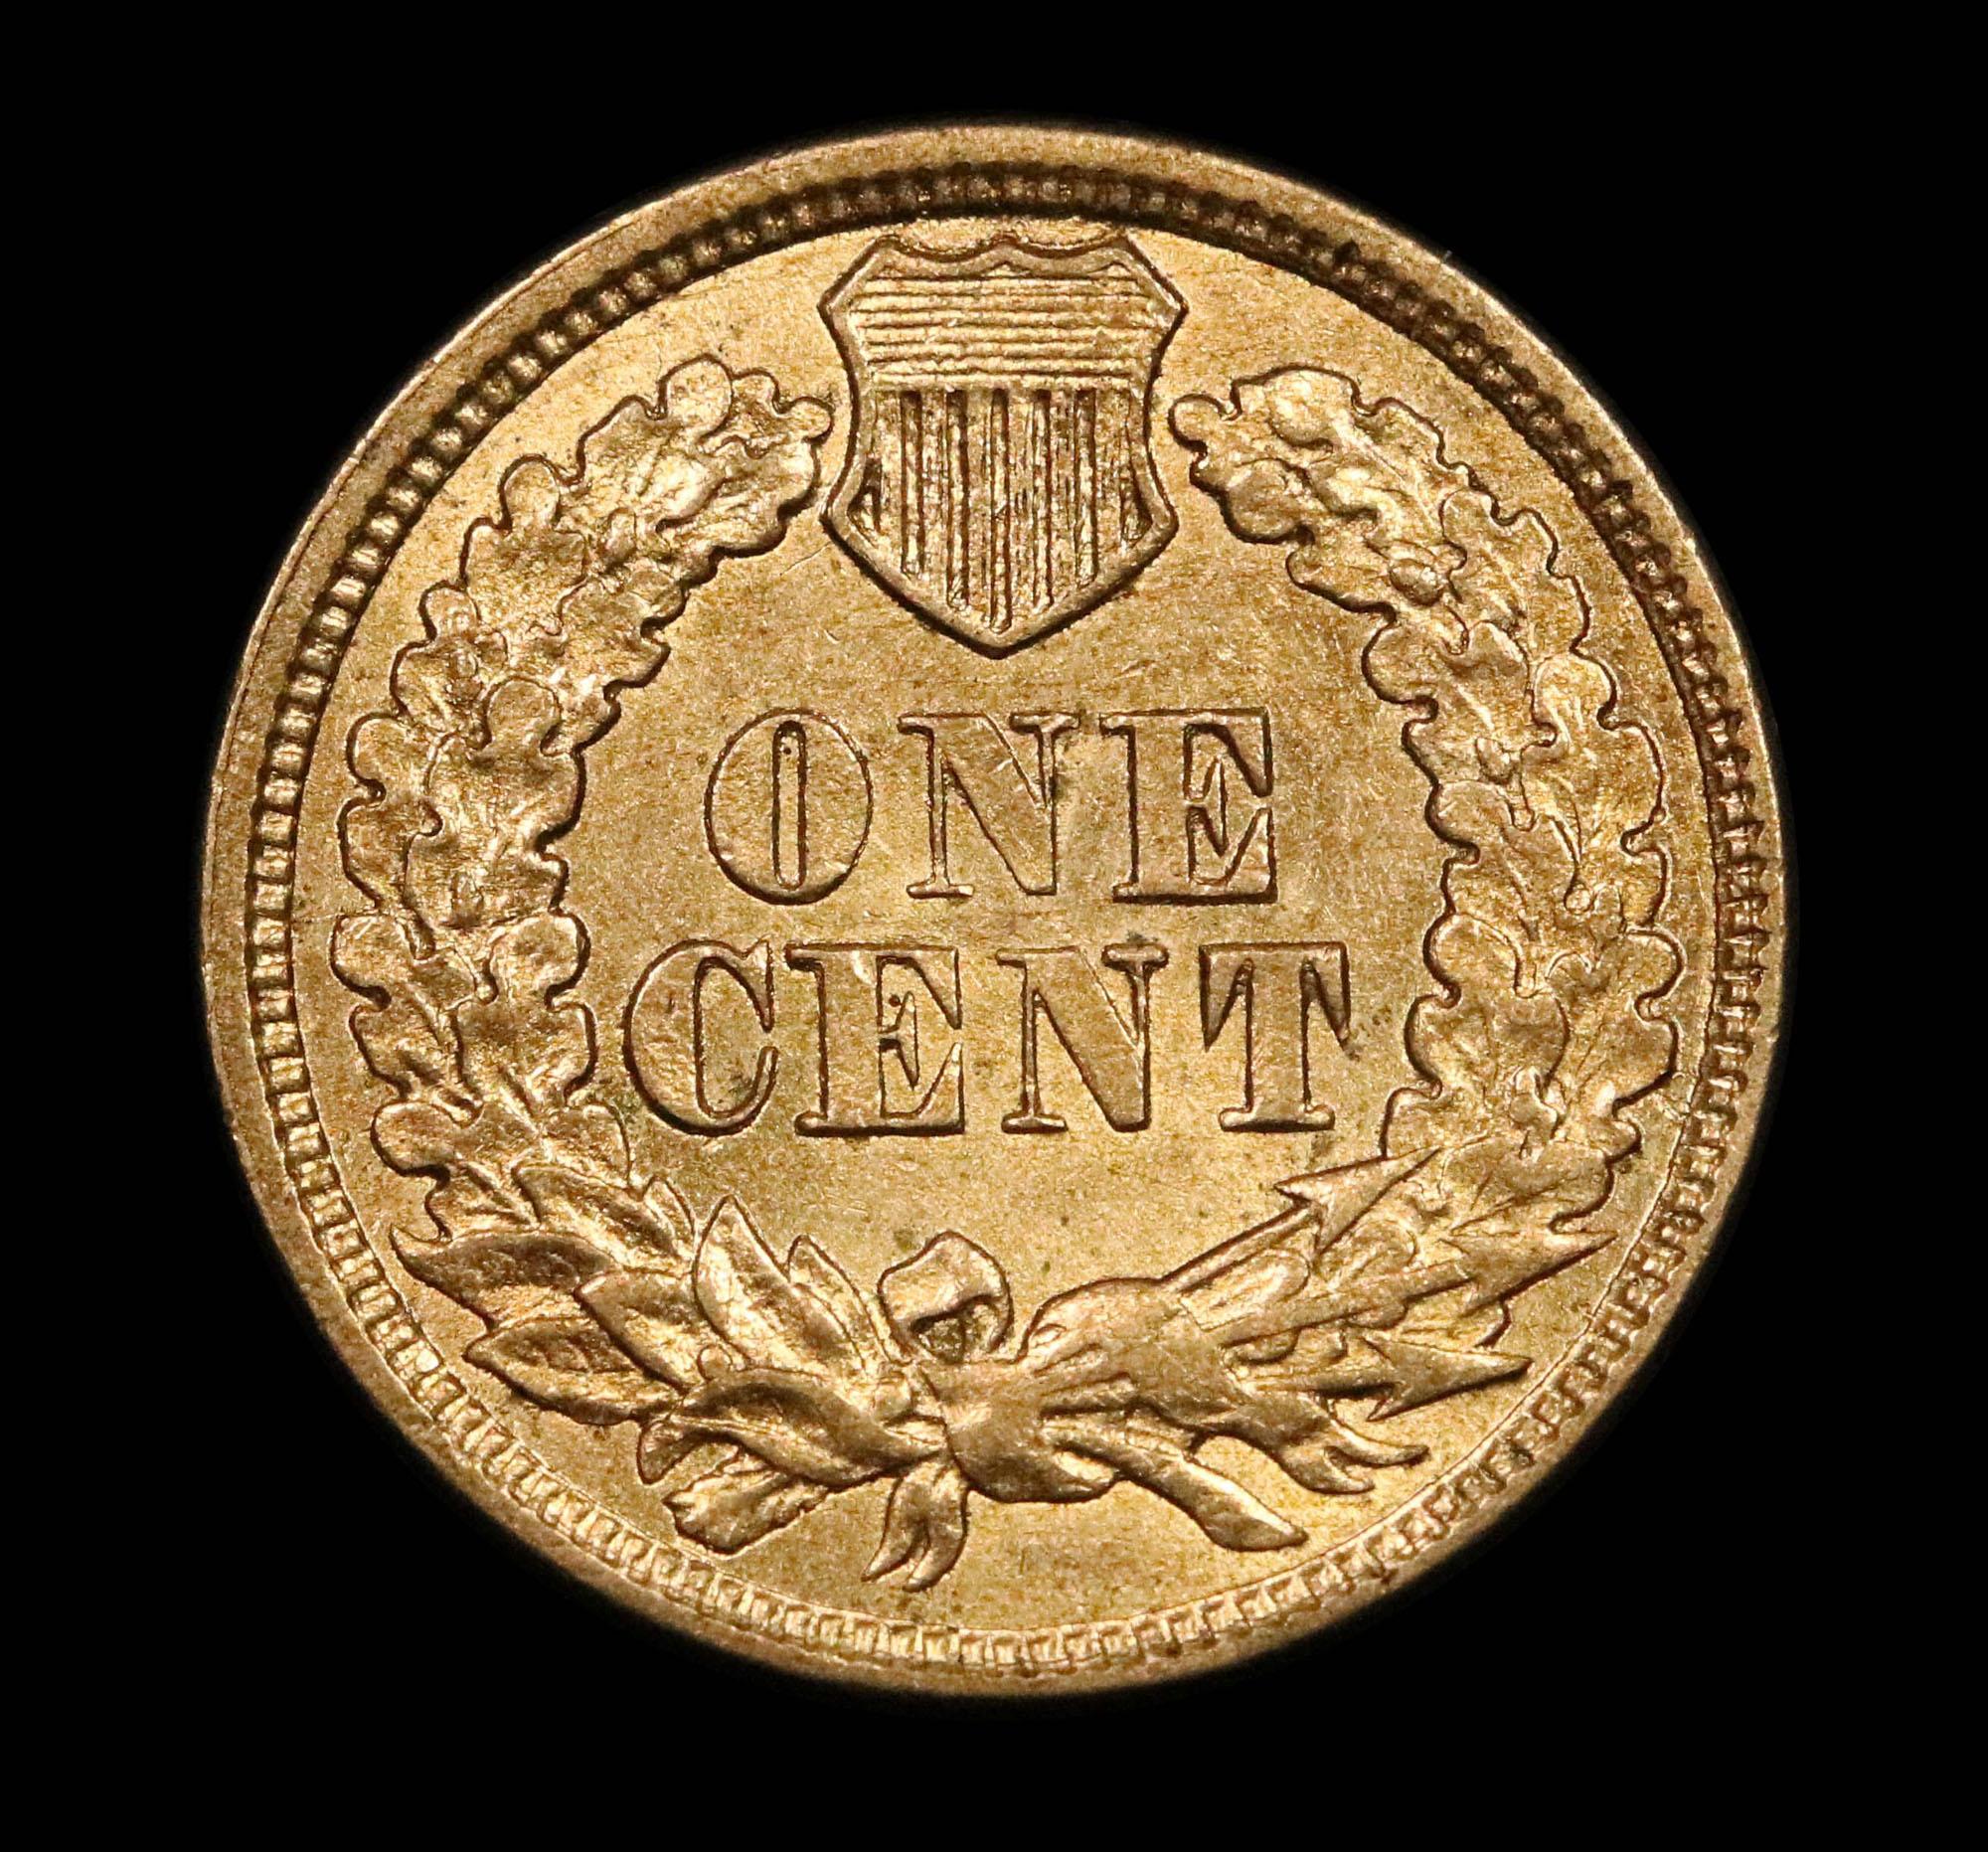 ***Auction Highlight*** 1862 Indian Cent 1c Graded GEM Unc by USCG (fc)